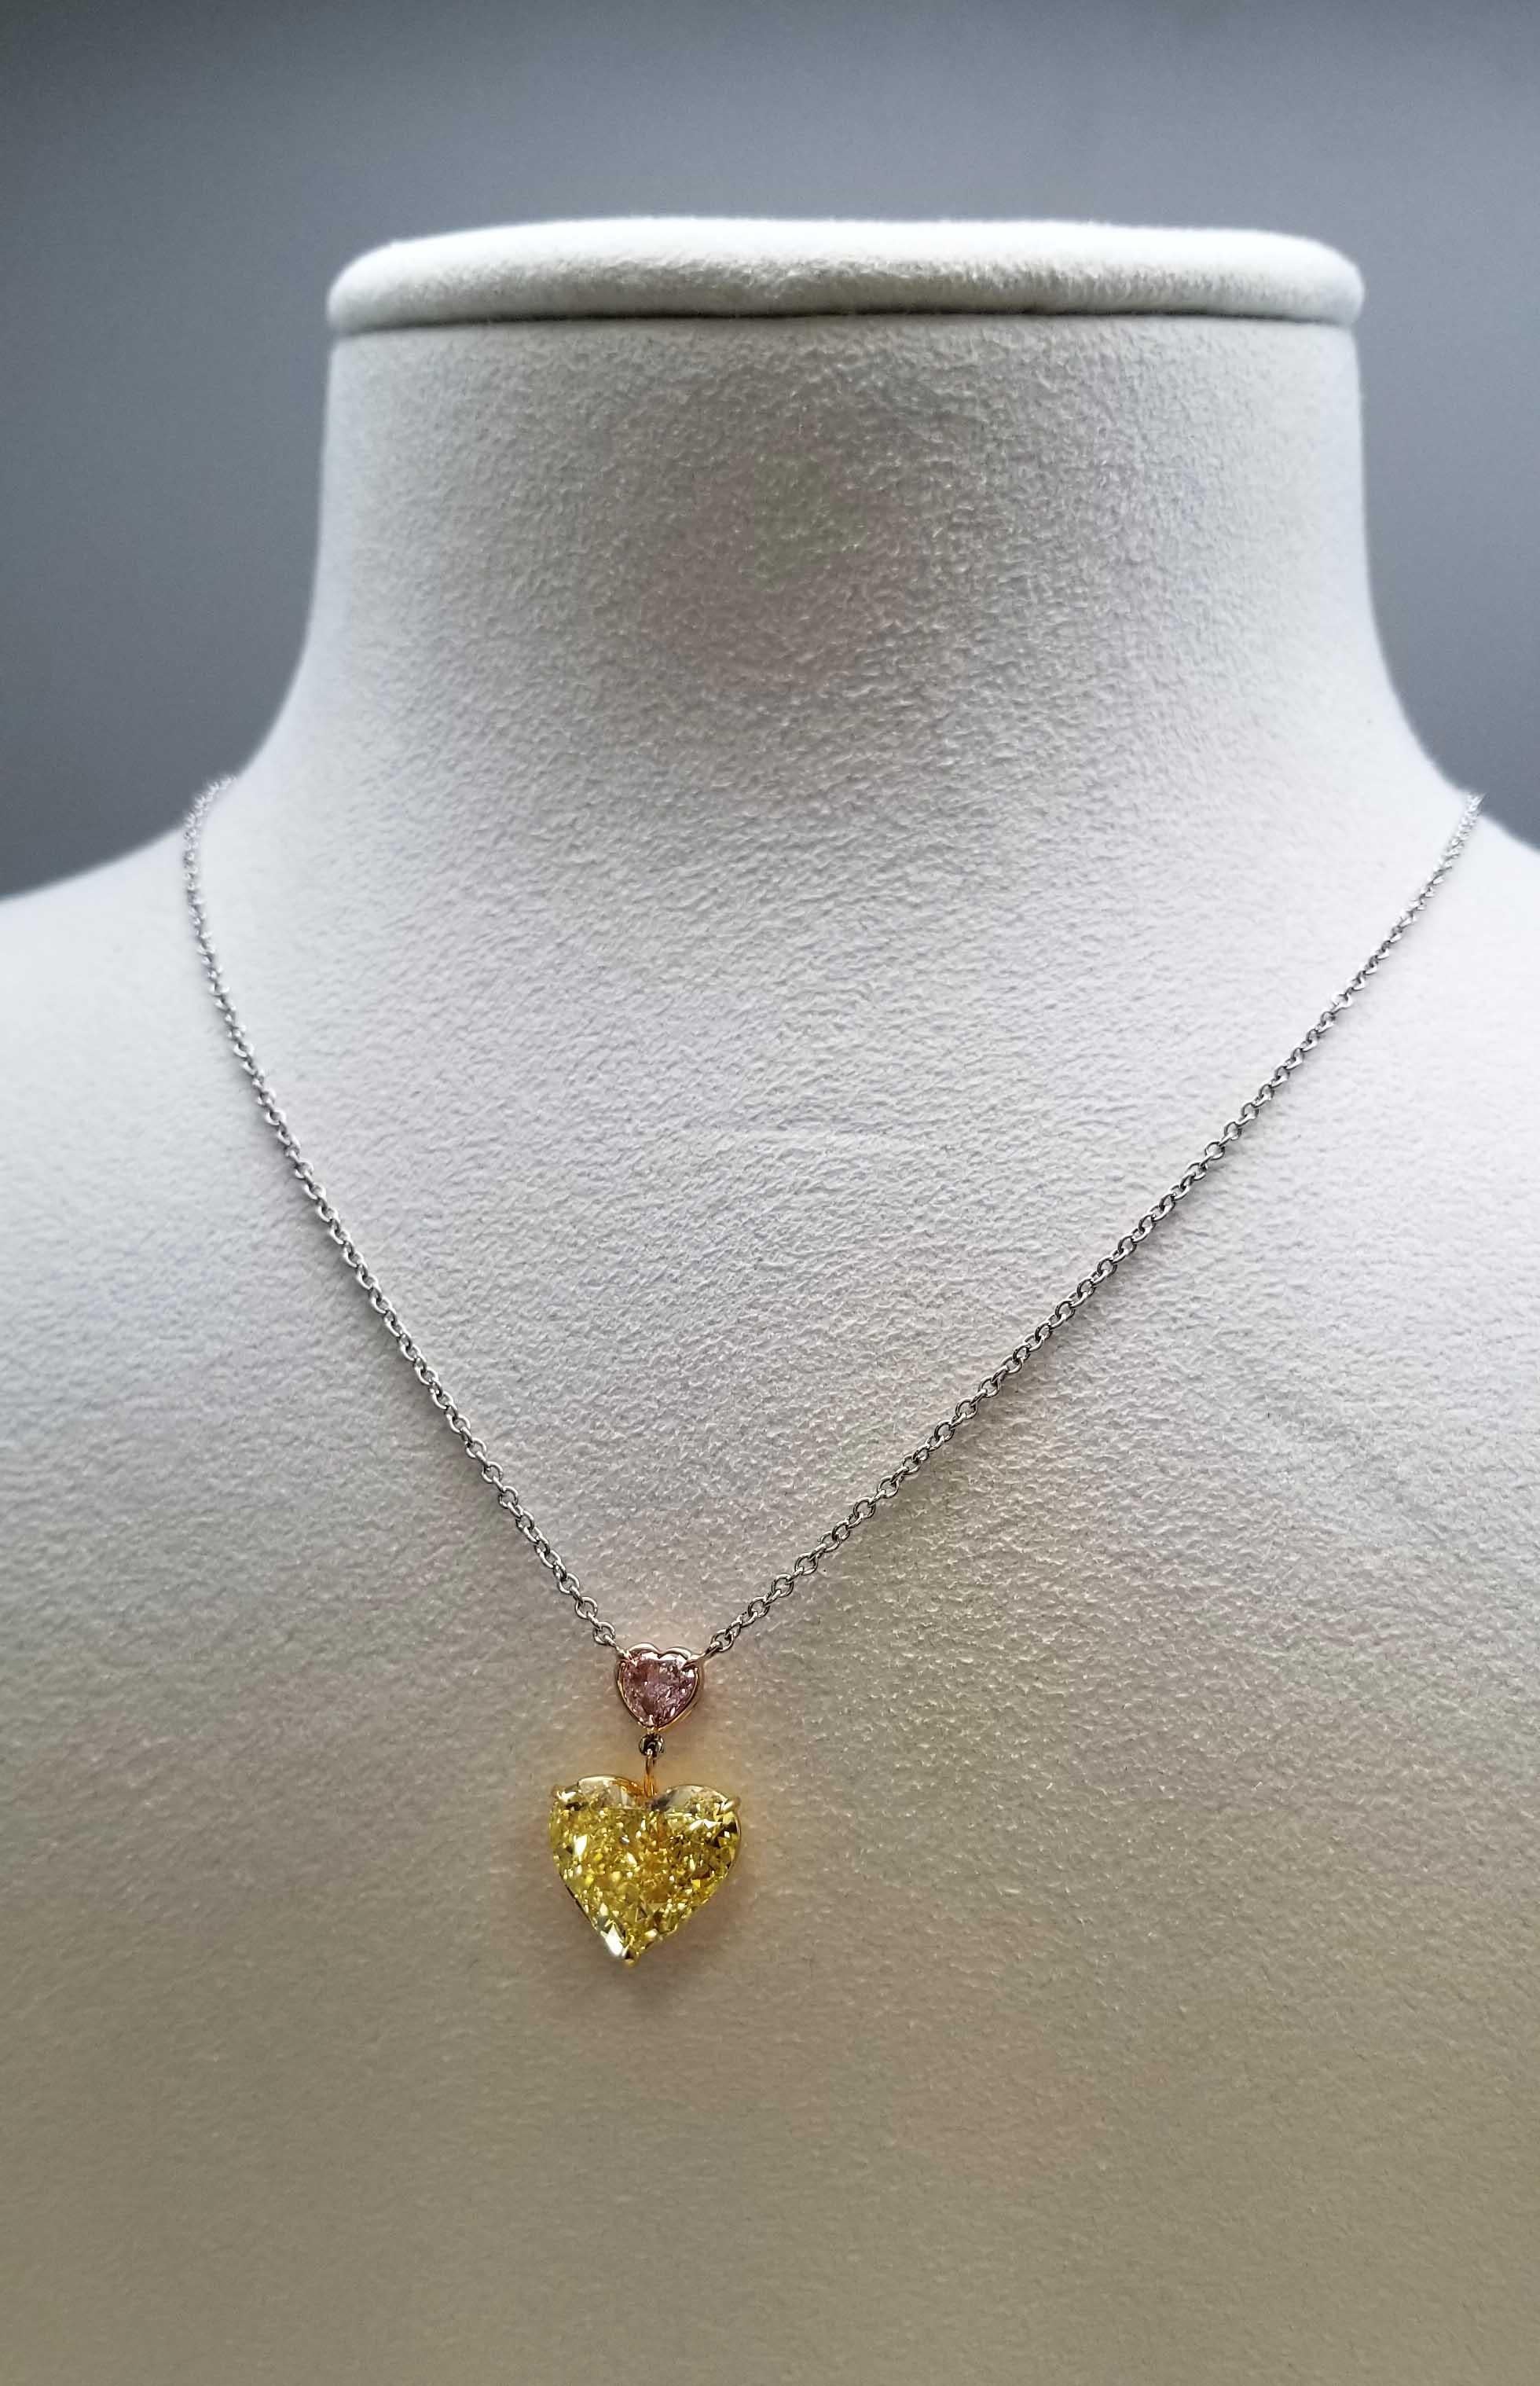 Contemporary SCARSELLI 6 Carat Fancy Vivid Yellow Diamond Necklace GIA Certified For Sale